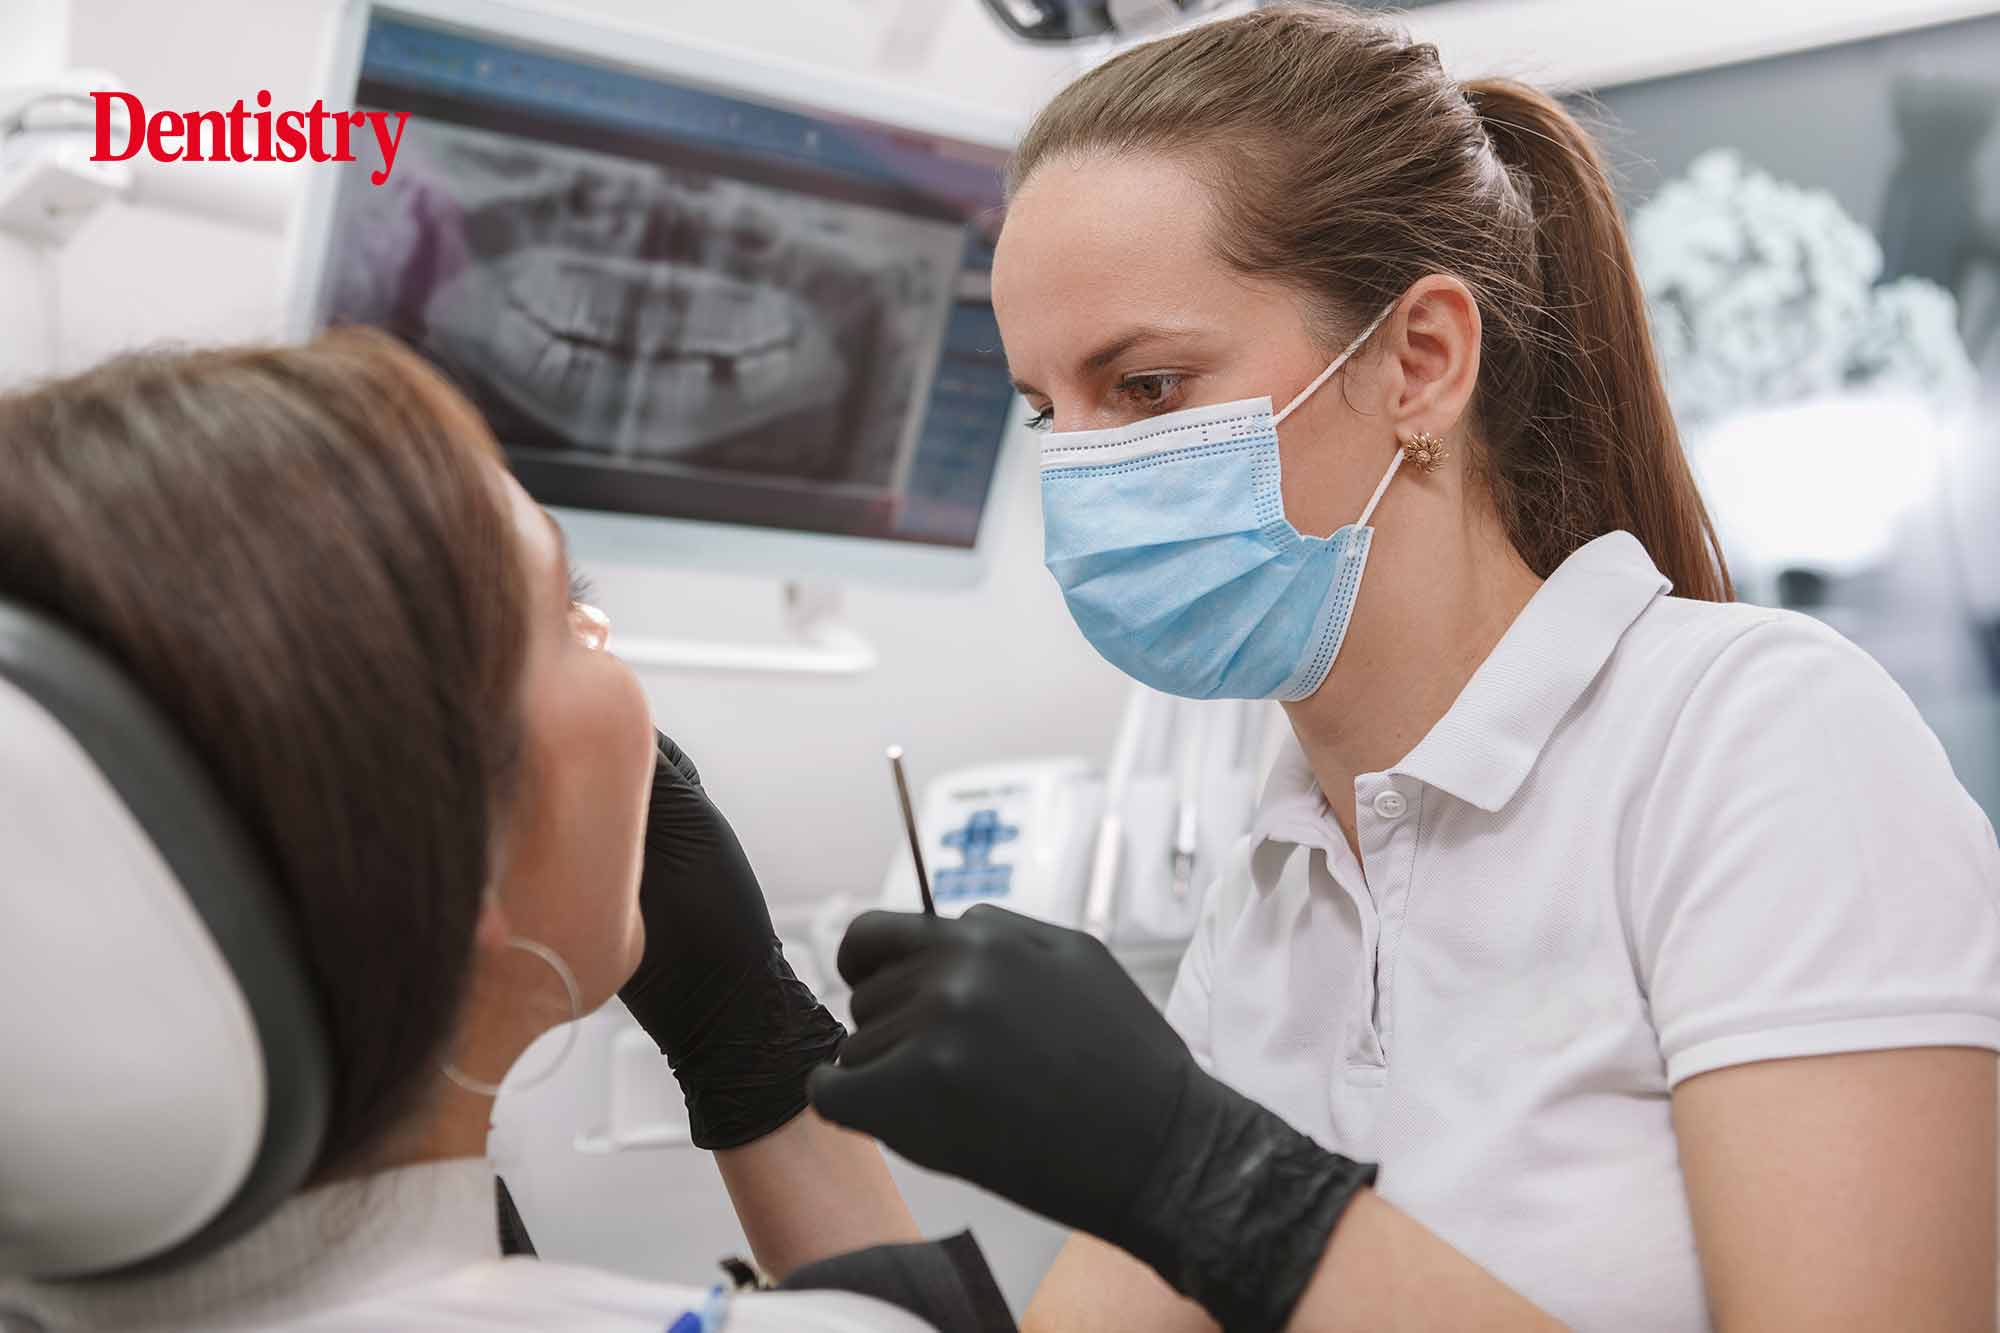 ARF administrative issue removes dental professionals from register for months